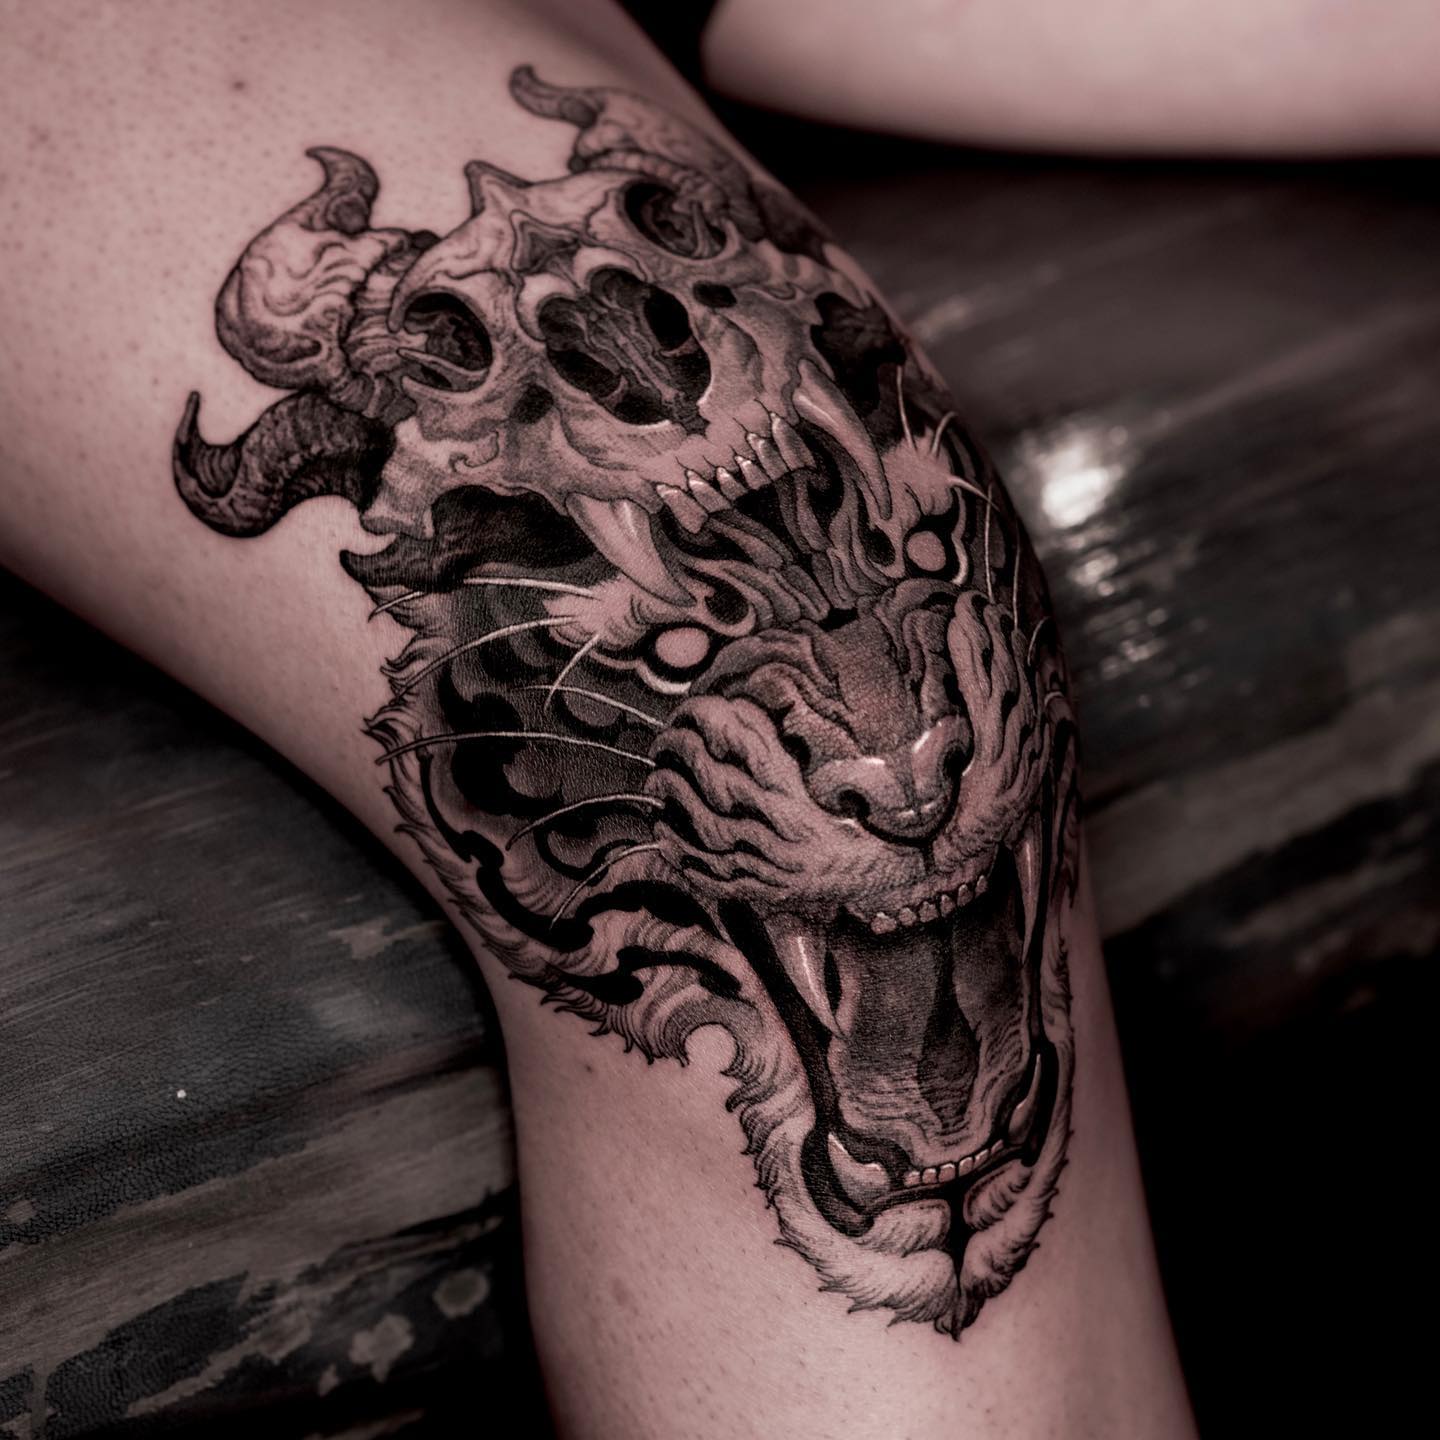 Such a cool tiger tattoo that you’re going to fancy if you’re a warrior and someone who is naturally dramatic, loud, and bold. Tigers are used to describe our inner animalistic and wild nature. If you like wild creatures and you feel like you’re the king of the jungle yourself, consider this giant black ink tattoo.